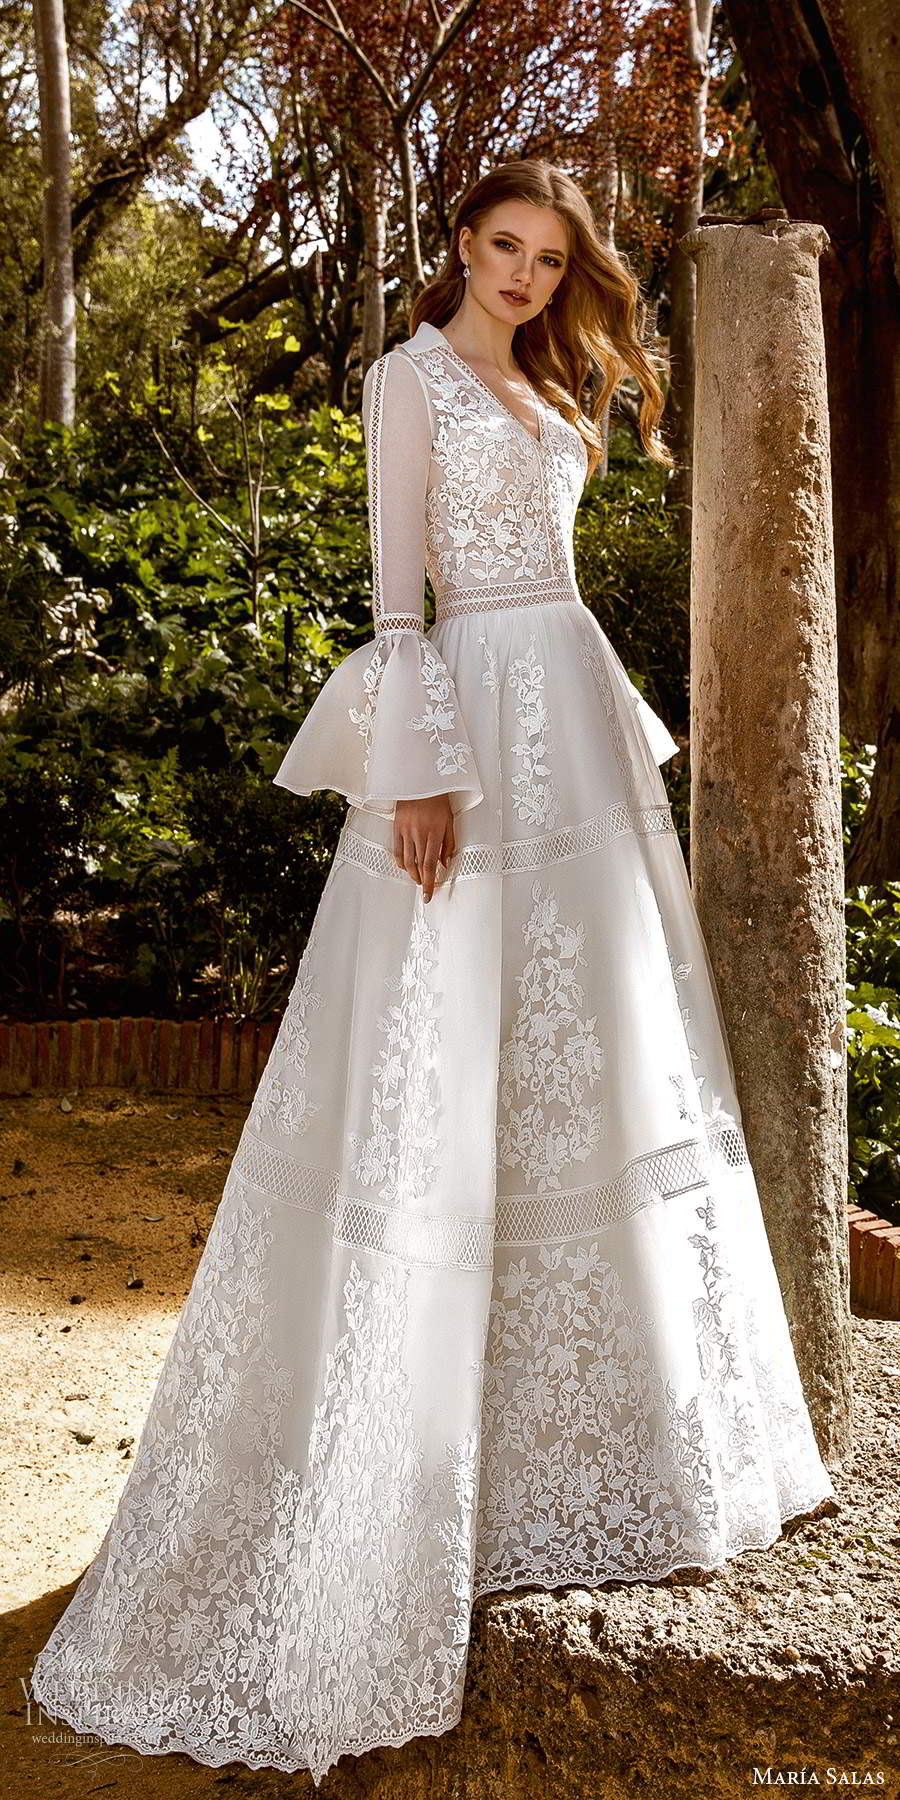 maria salas 2019 bridal long bell sleeves collar v neckline fully embellished lace a line ball gown wedding dress chapel train (6) mv